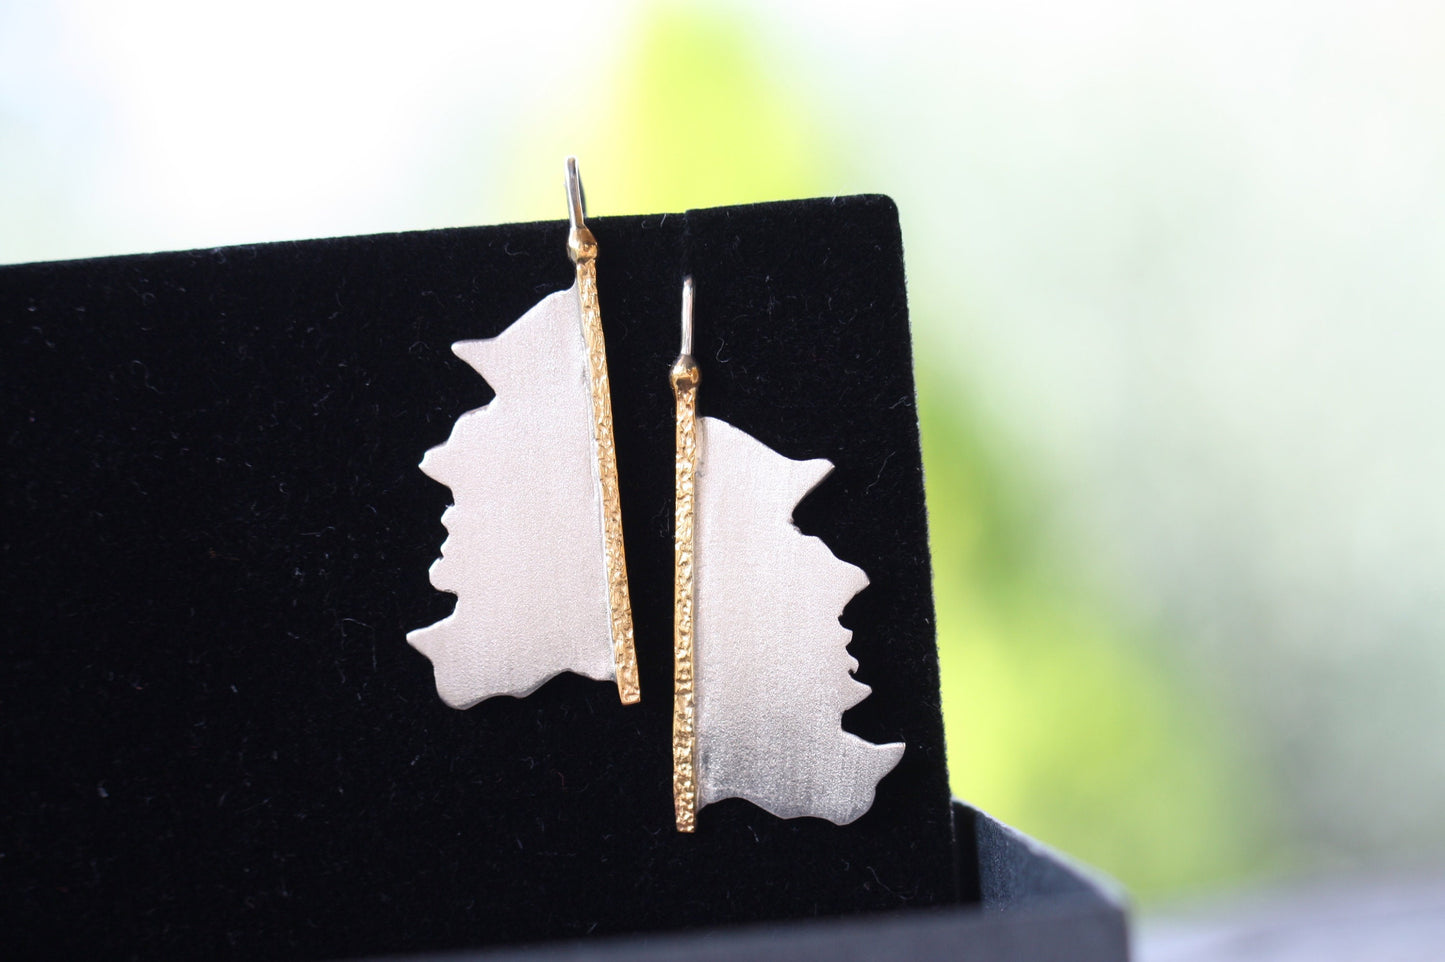 Gold Plated Earrings for Women Geometric Style and Frozen Finish